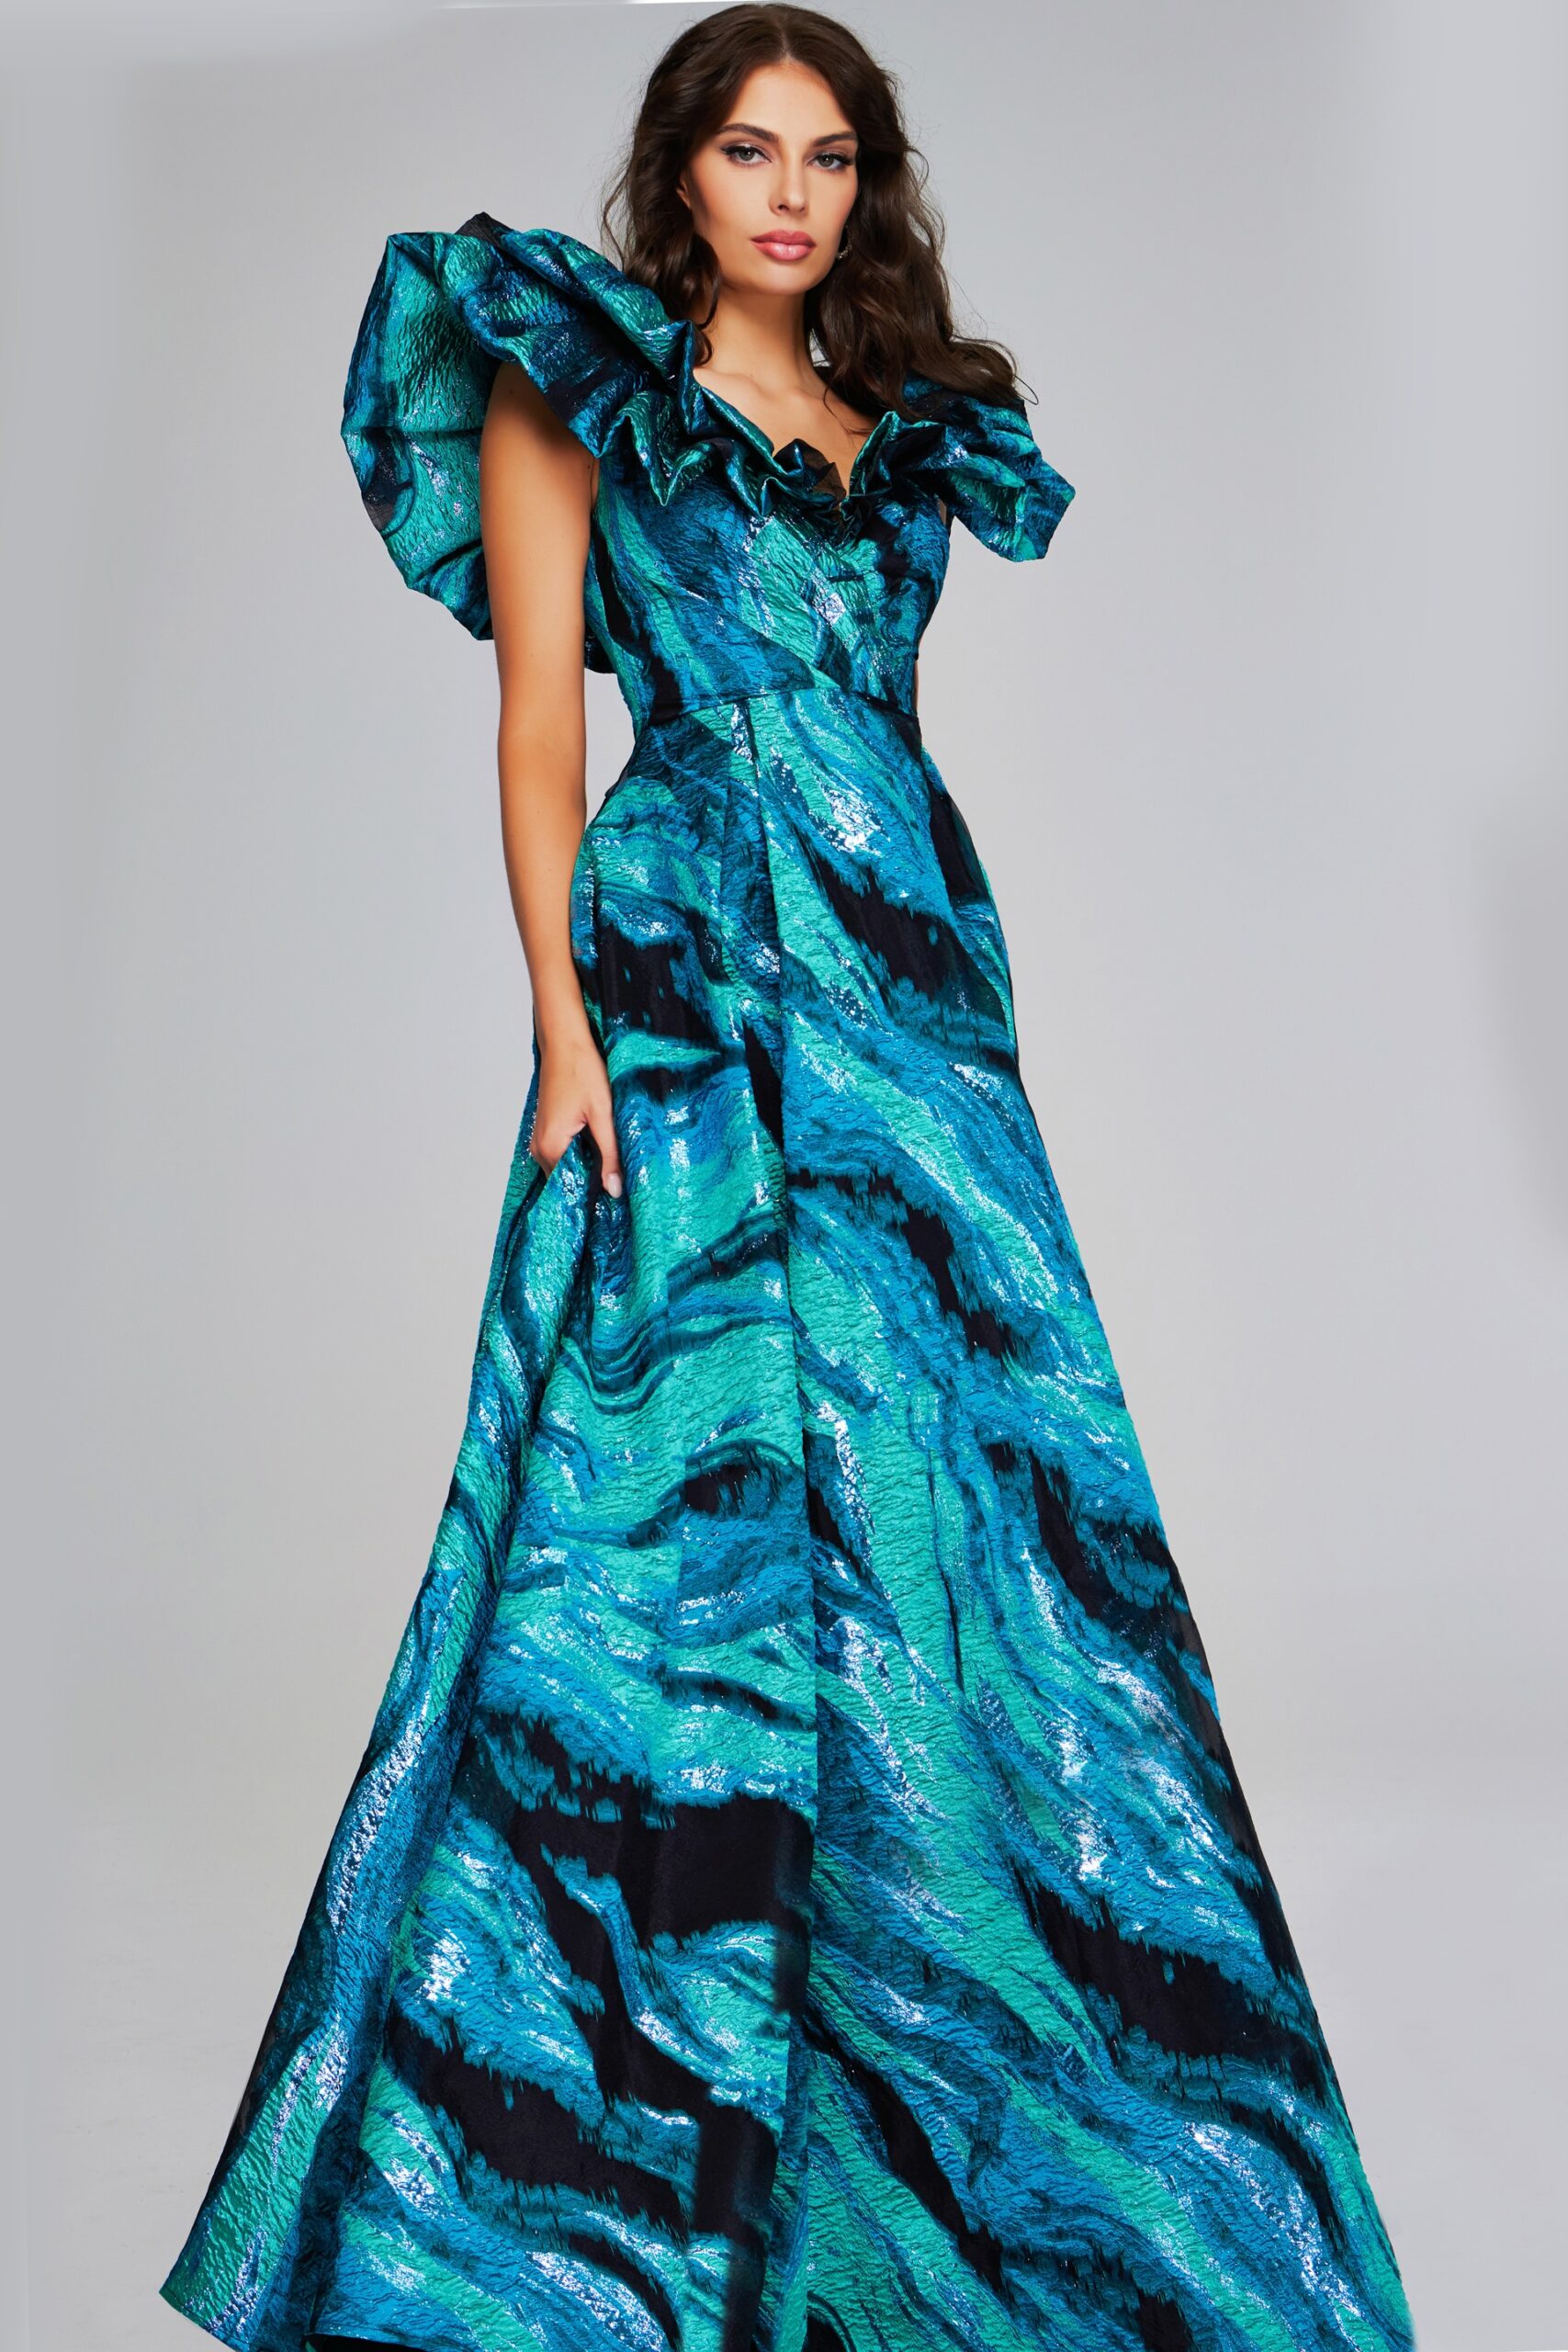 Vibrant Teal Multi-Print Gown with Ruffled V-Neckline 40696